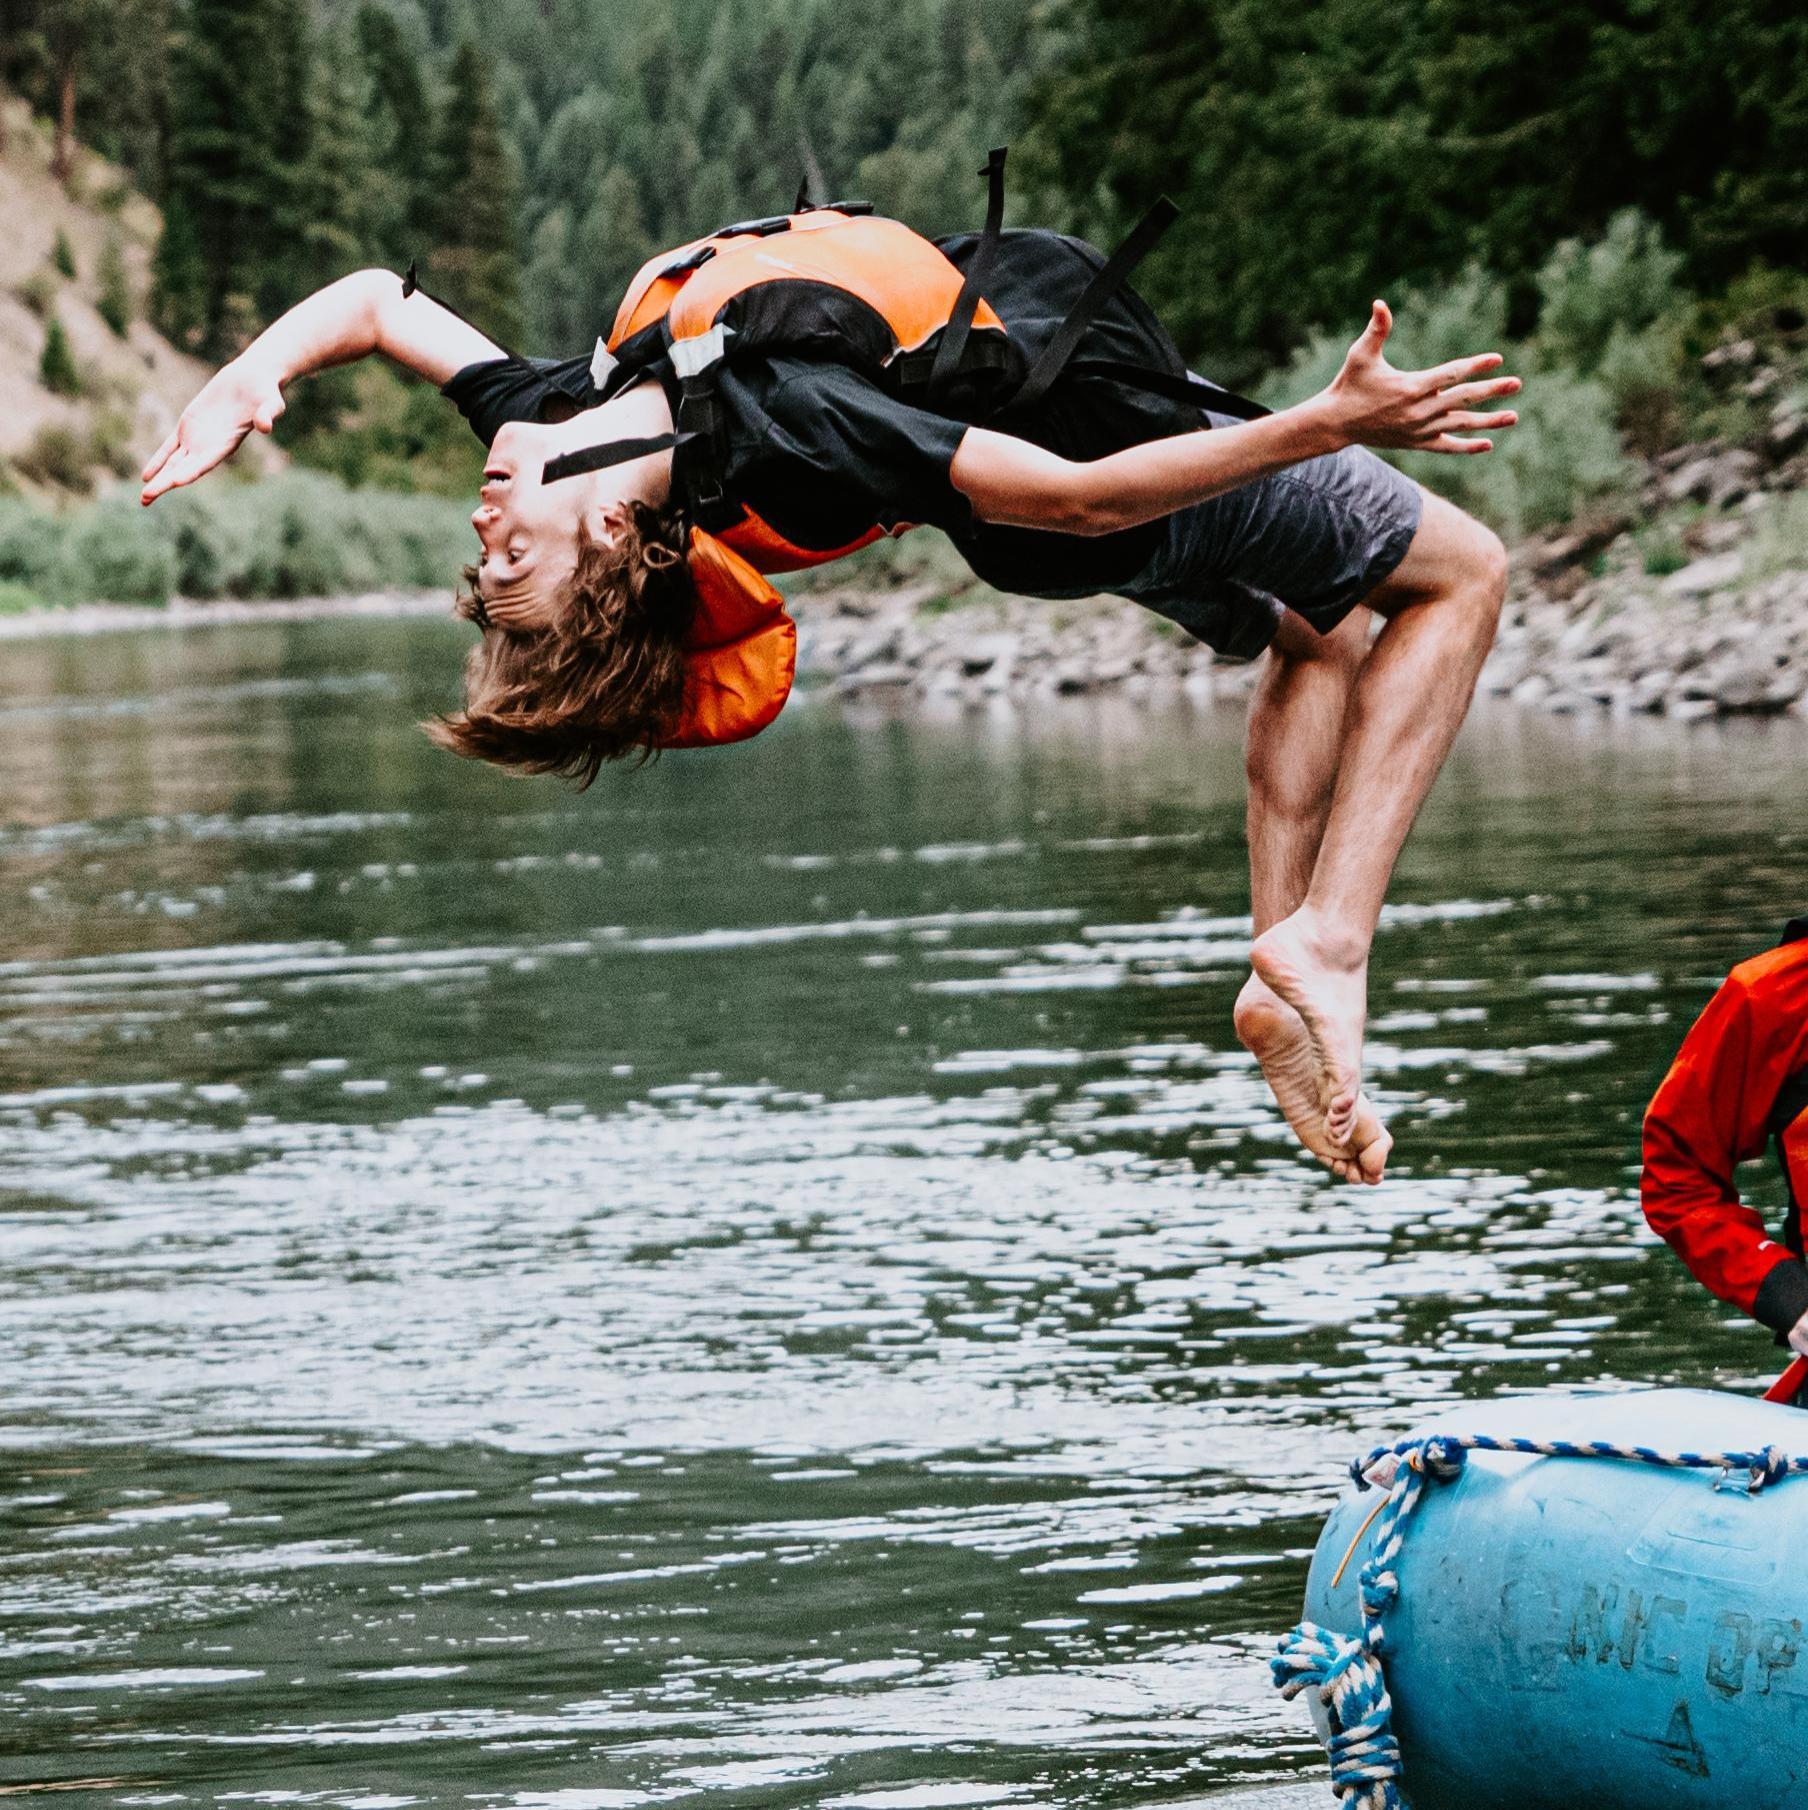 Person performing a backflip off a blue raft into the Clarkfork River, while another person sits on the raft holding a paddle, with a second raft and tree-lined shore in the background